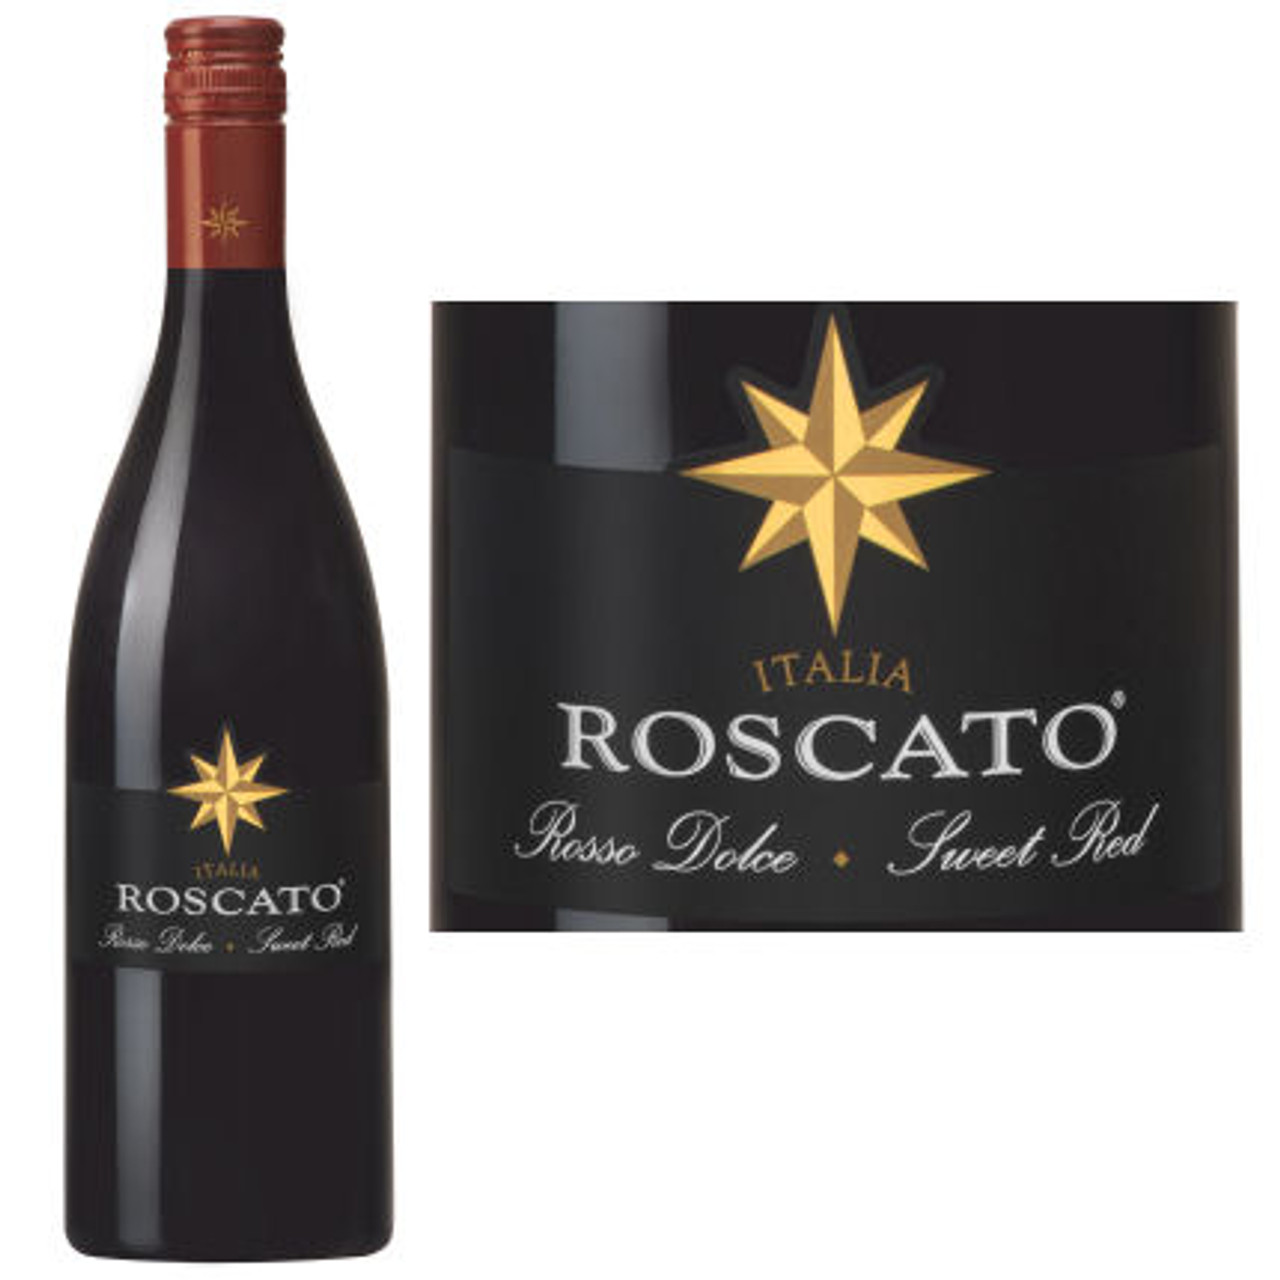 Roscato Rosso Dolce Sweet Red 2-250ml Cans :: Can Wine & Wine Cocktails